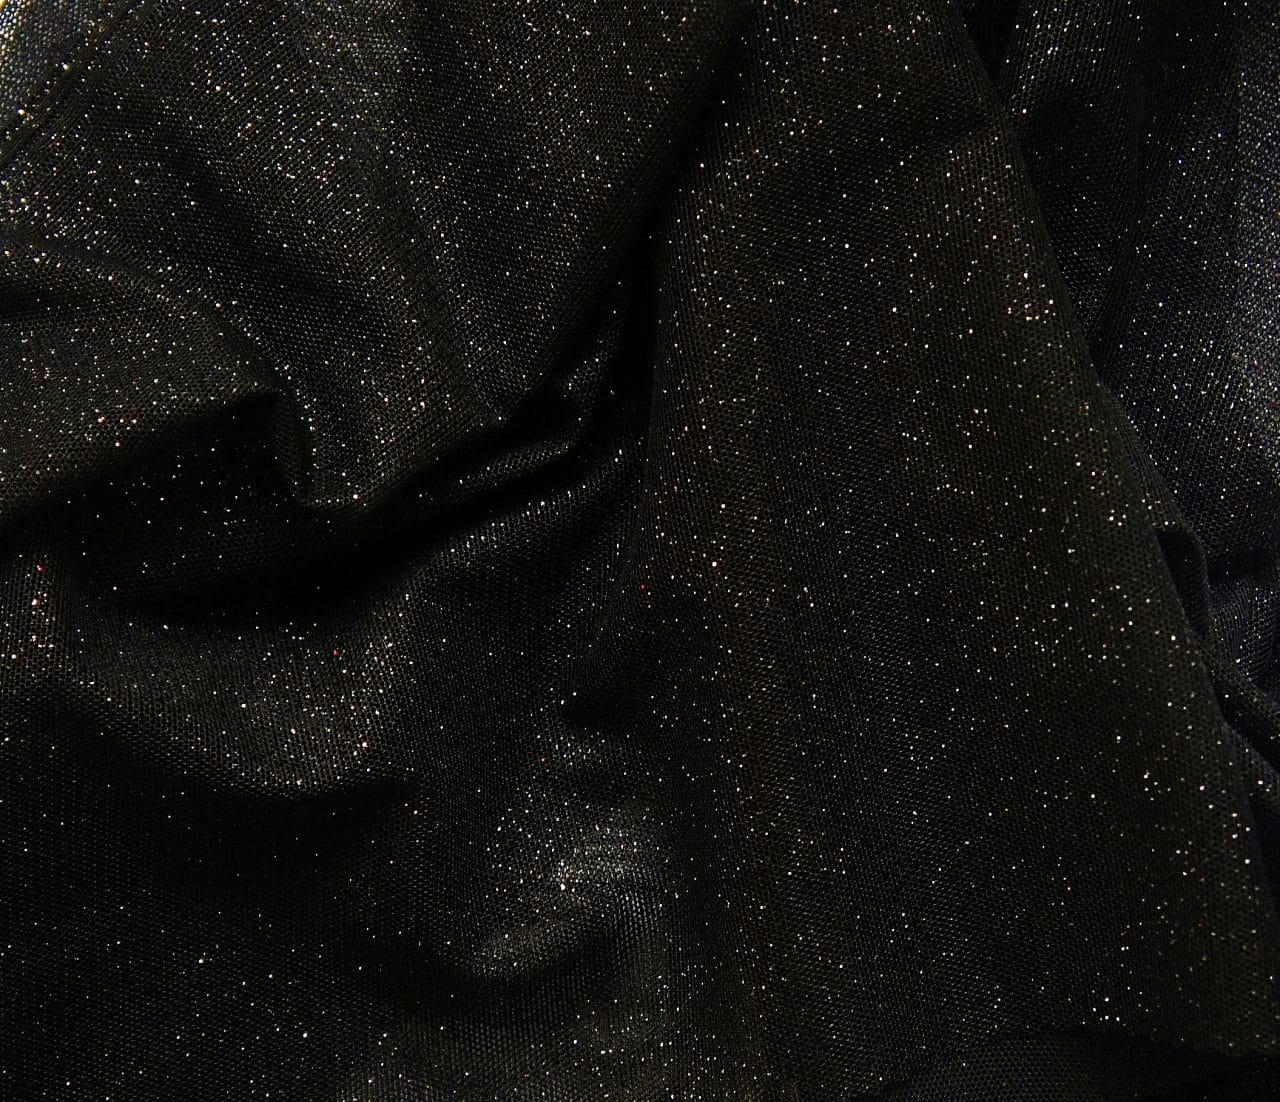 Black Glitter Mesh fabric features all over black glitter on 2-way stretch black polyester mesh making it ideal for both semi-fitted and draped garments.